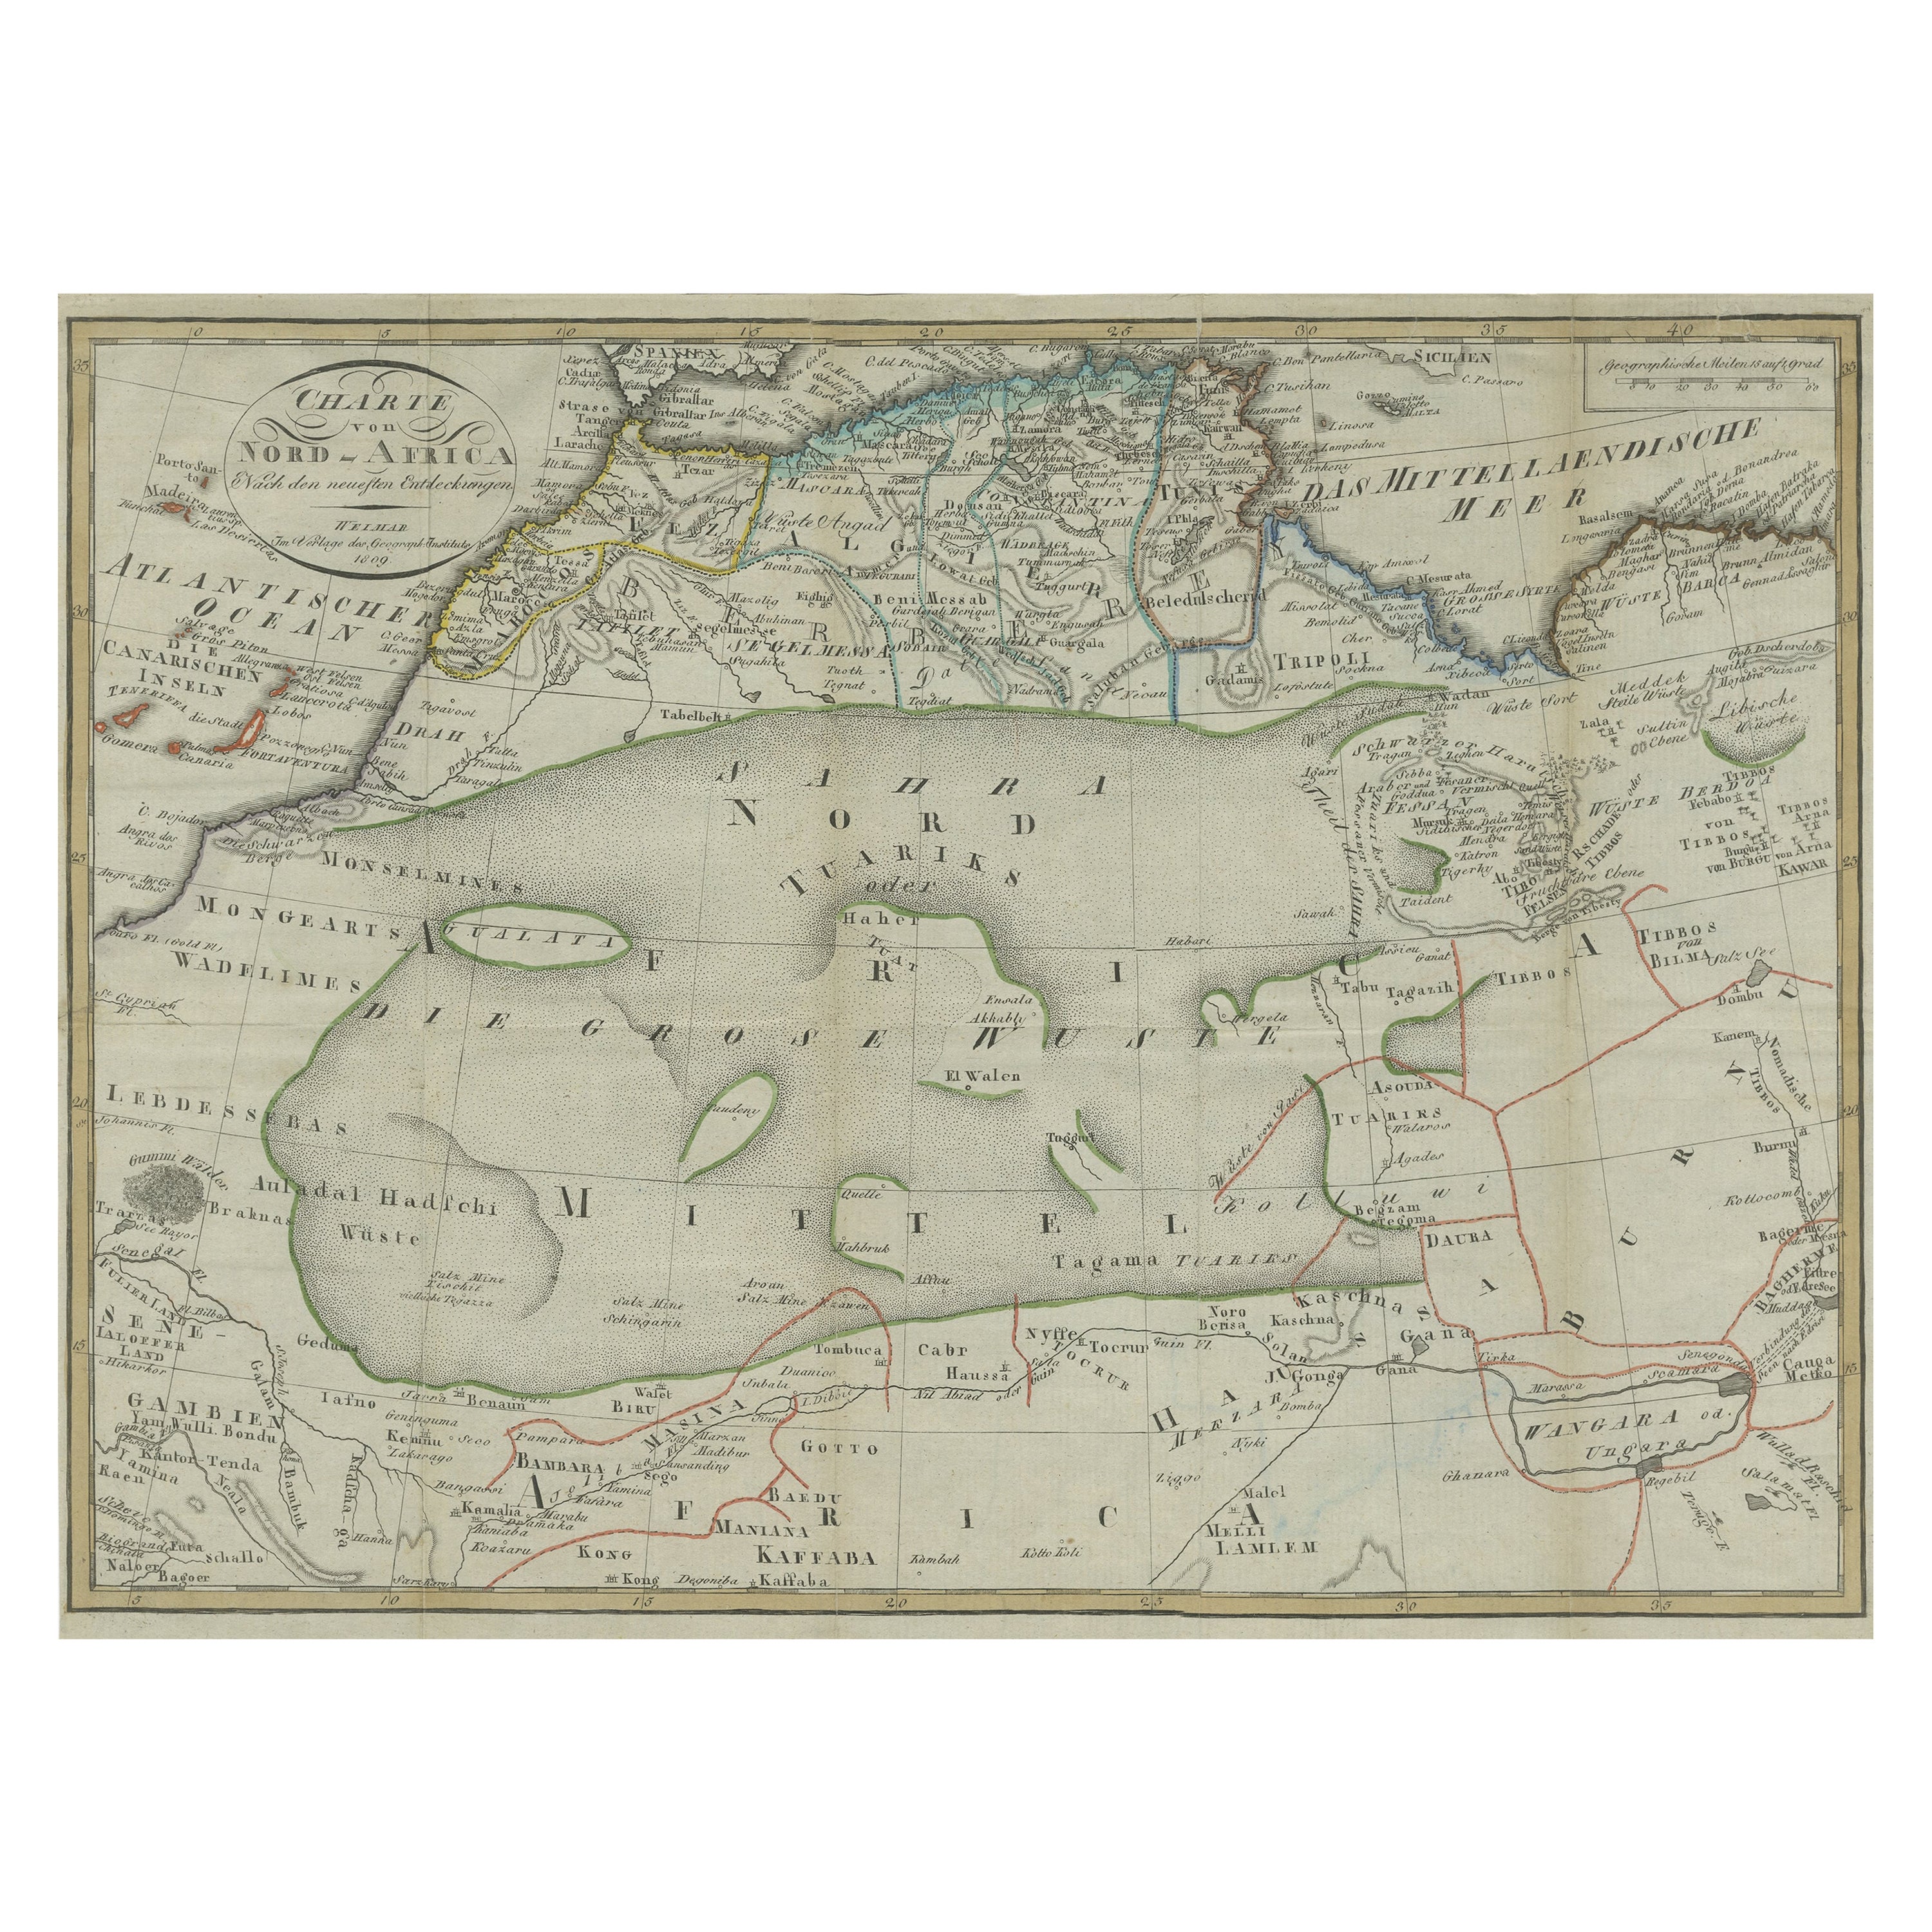 Antique Map of North Africa including the Sahara Desert For Sale